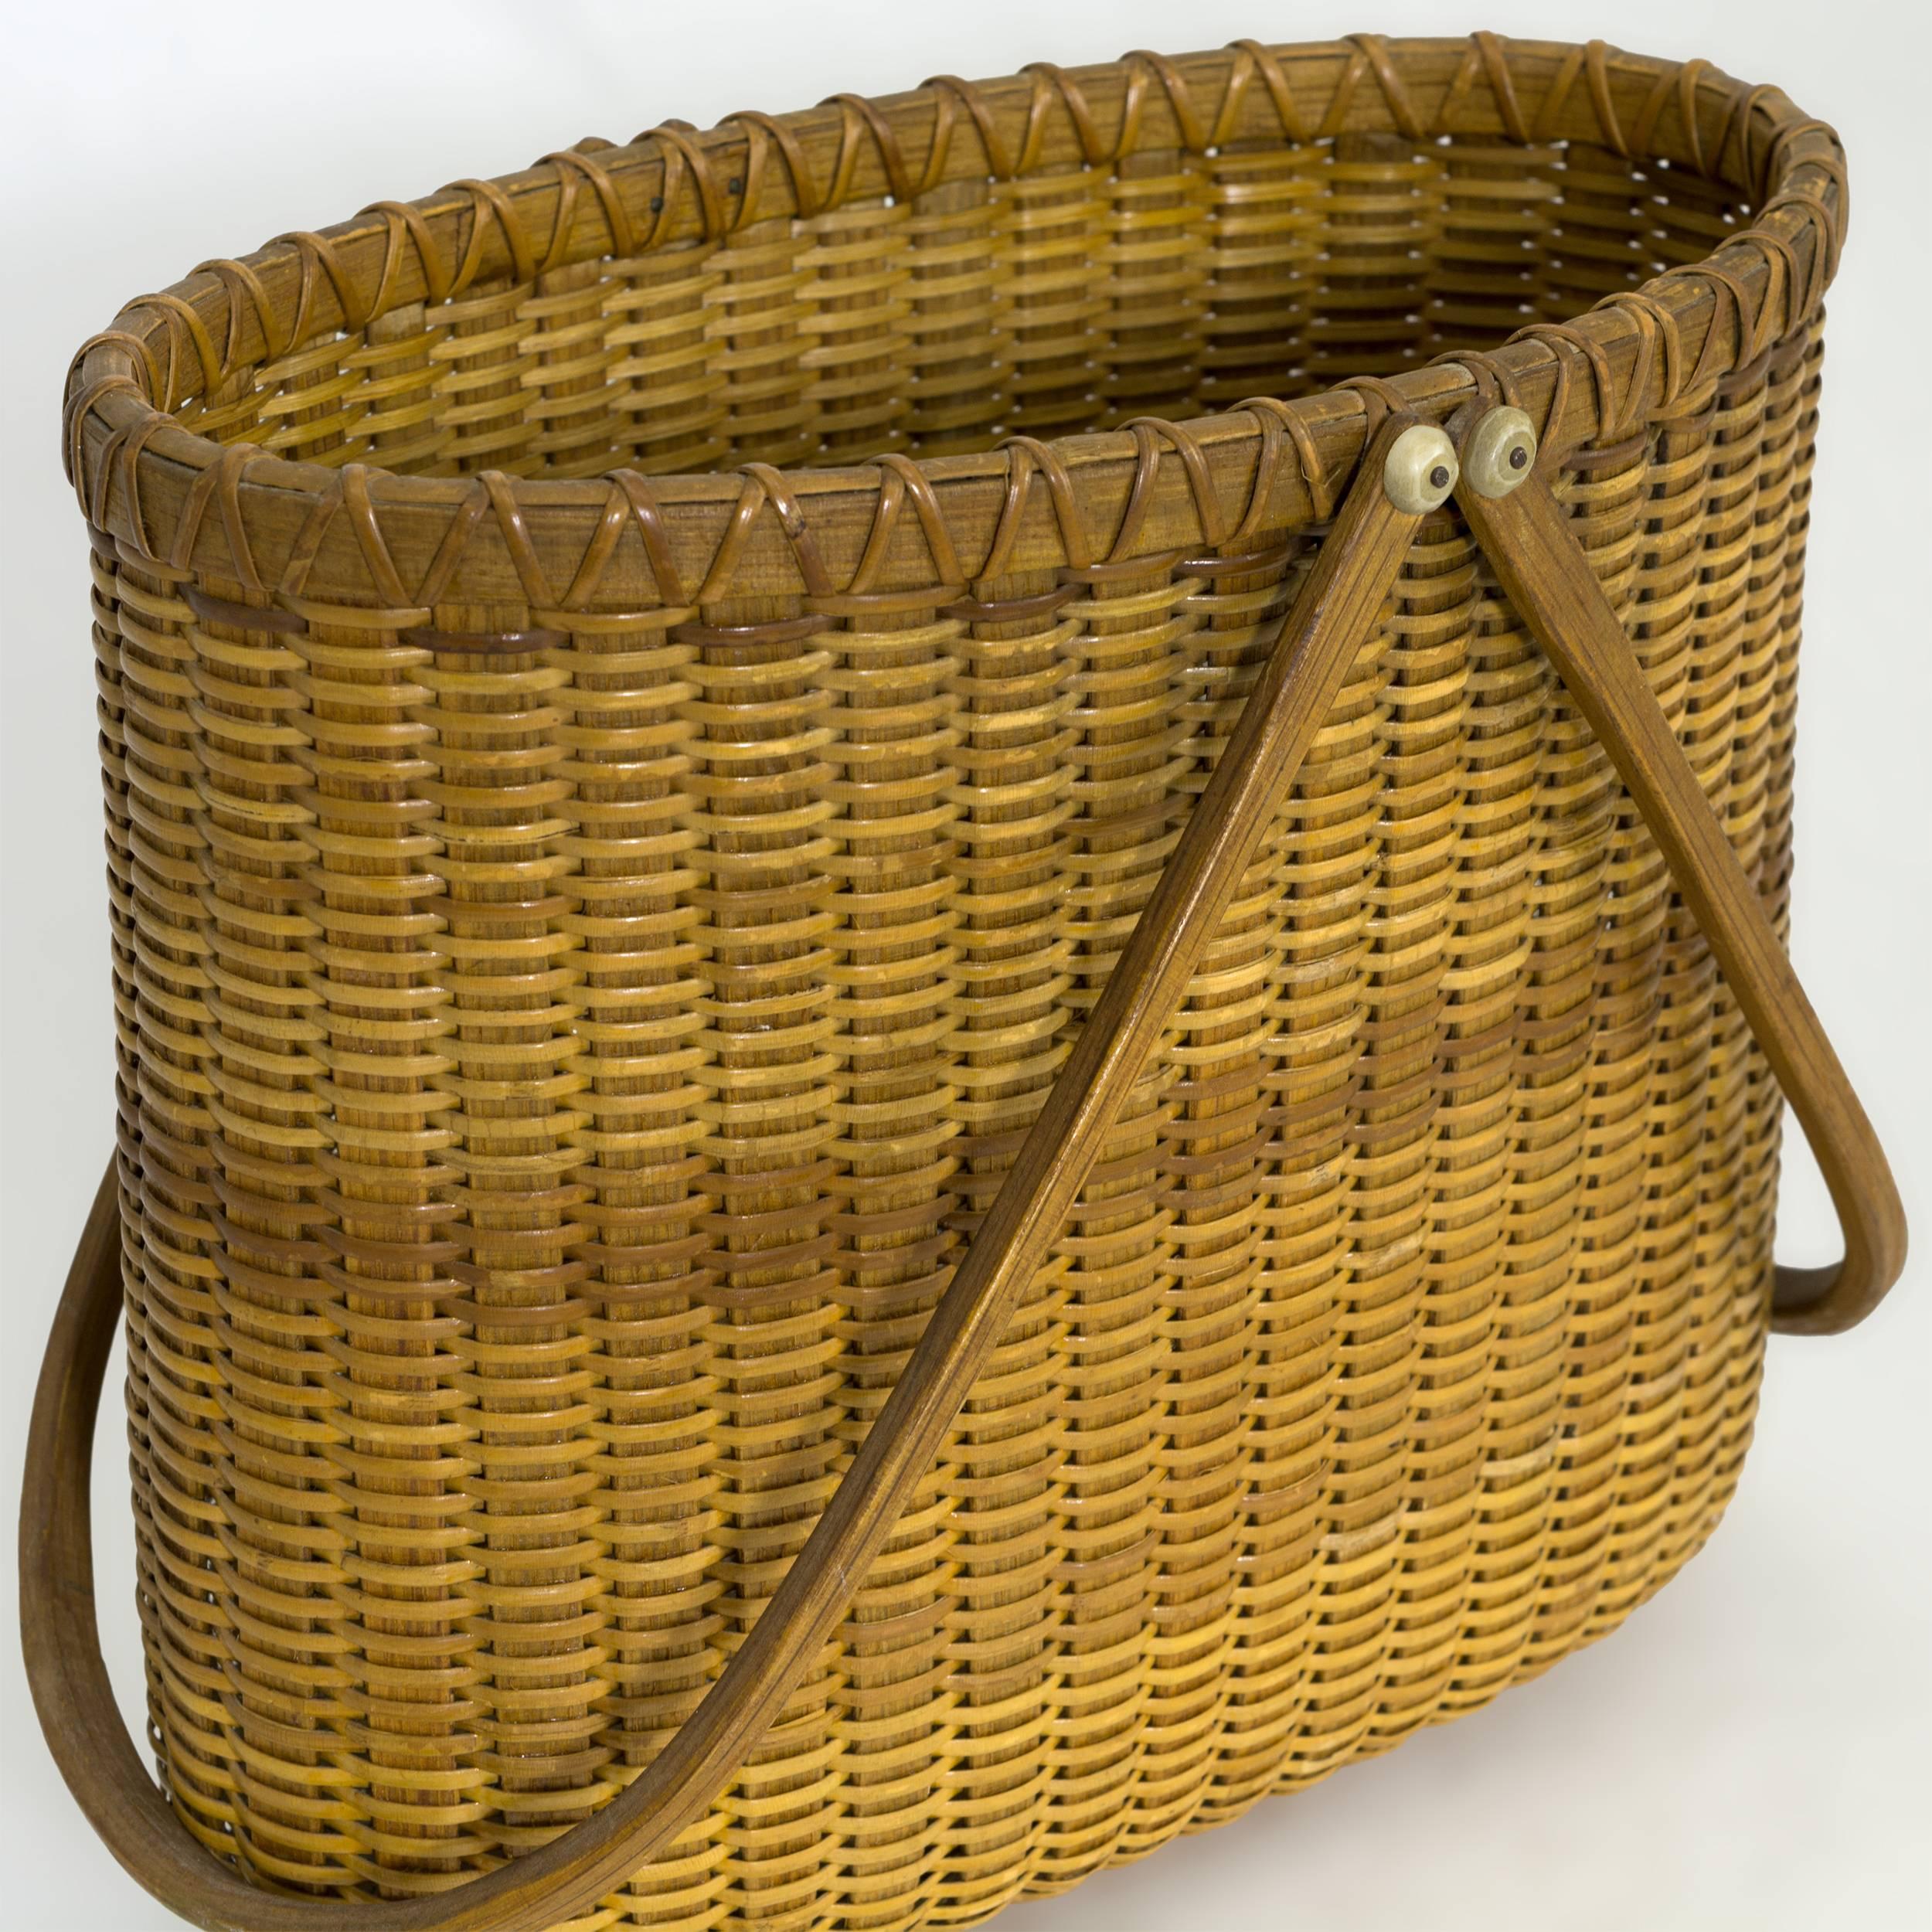 Double handles with bone knobs and a rich honey patina. Paul Willer made baskets at the House of Orange on Nantucket from the 1970s to the early 1990s. He is no longer making baskets, they are becoming scarce and are highly collected.